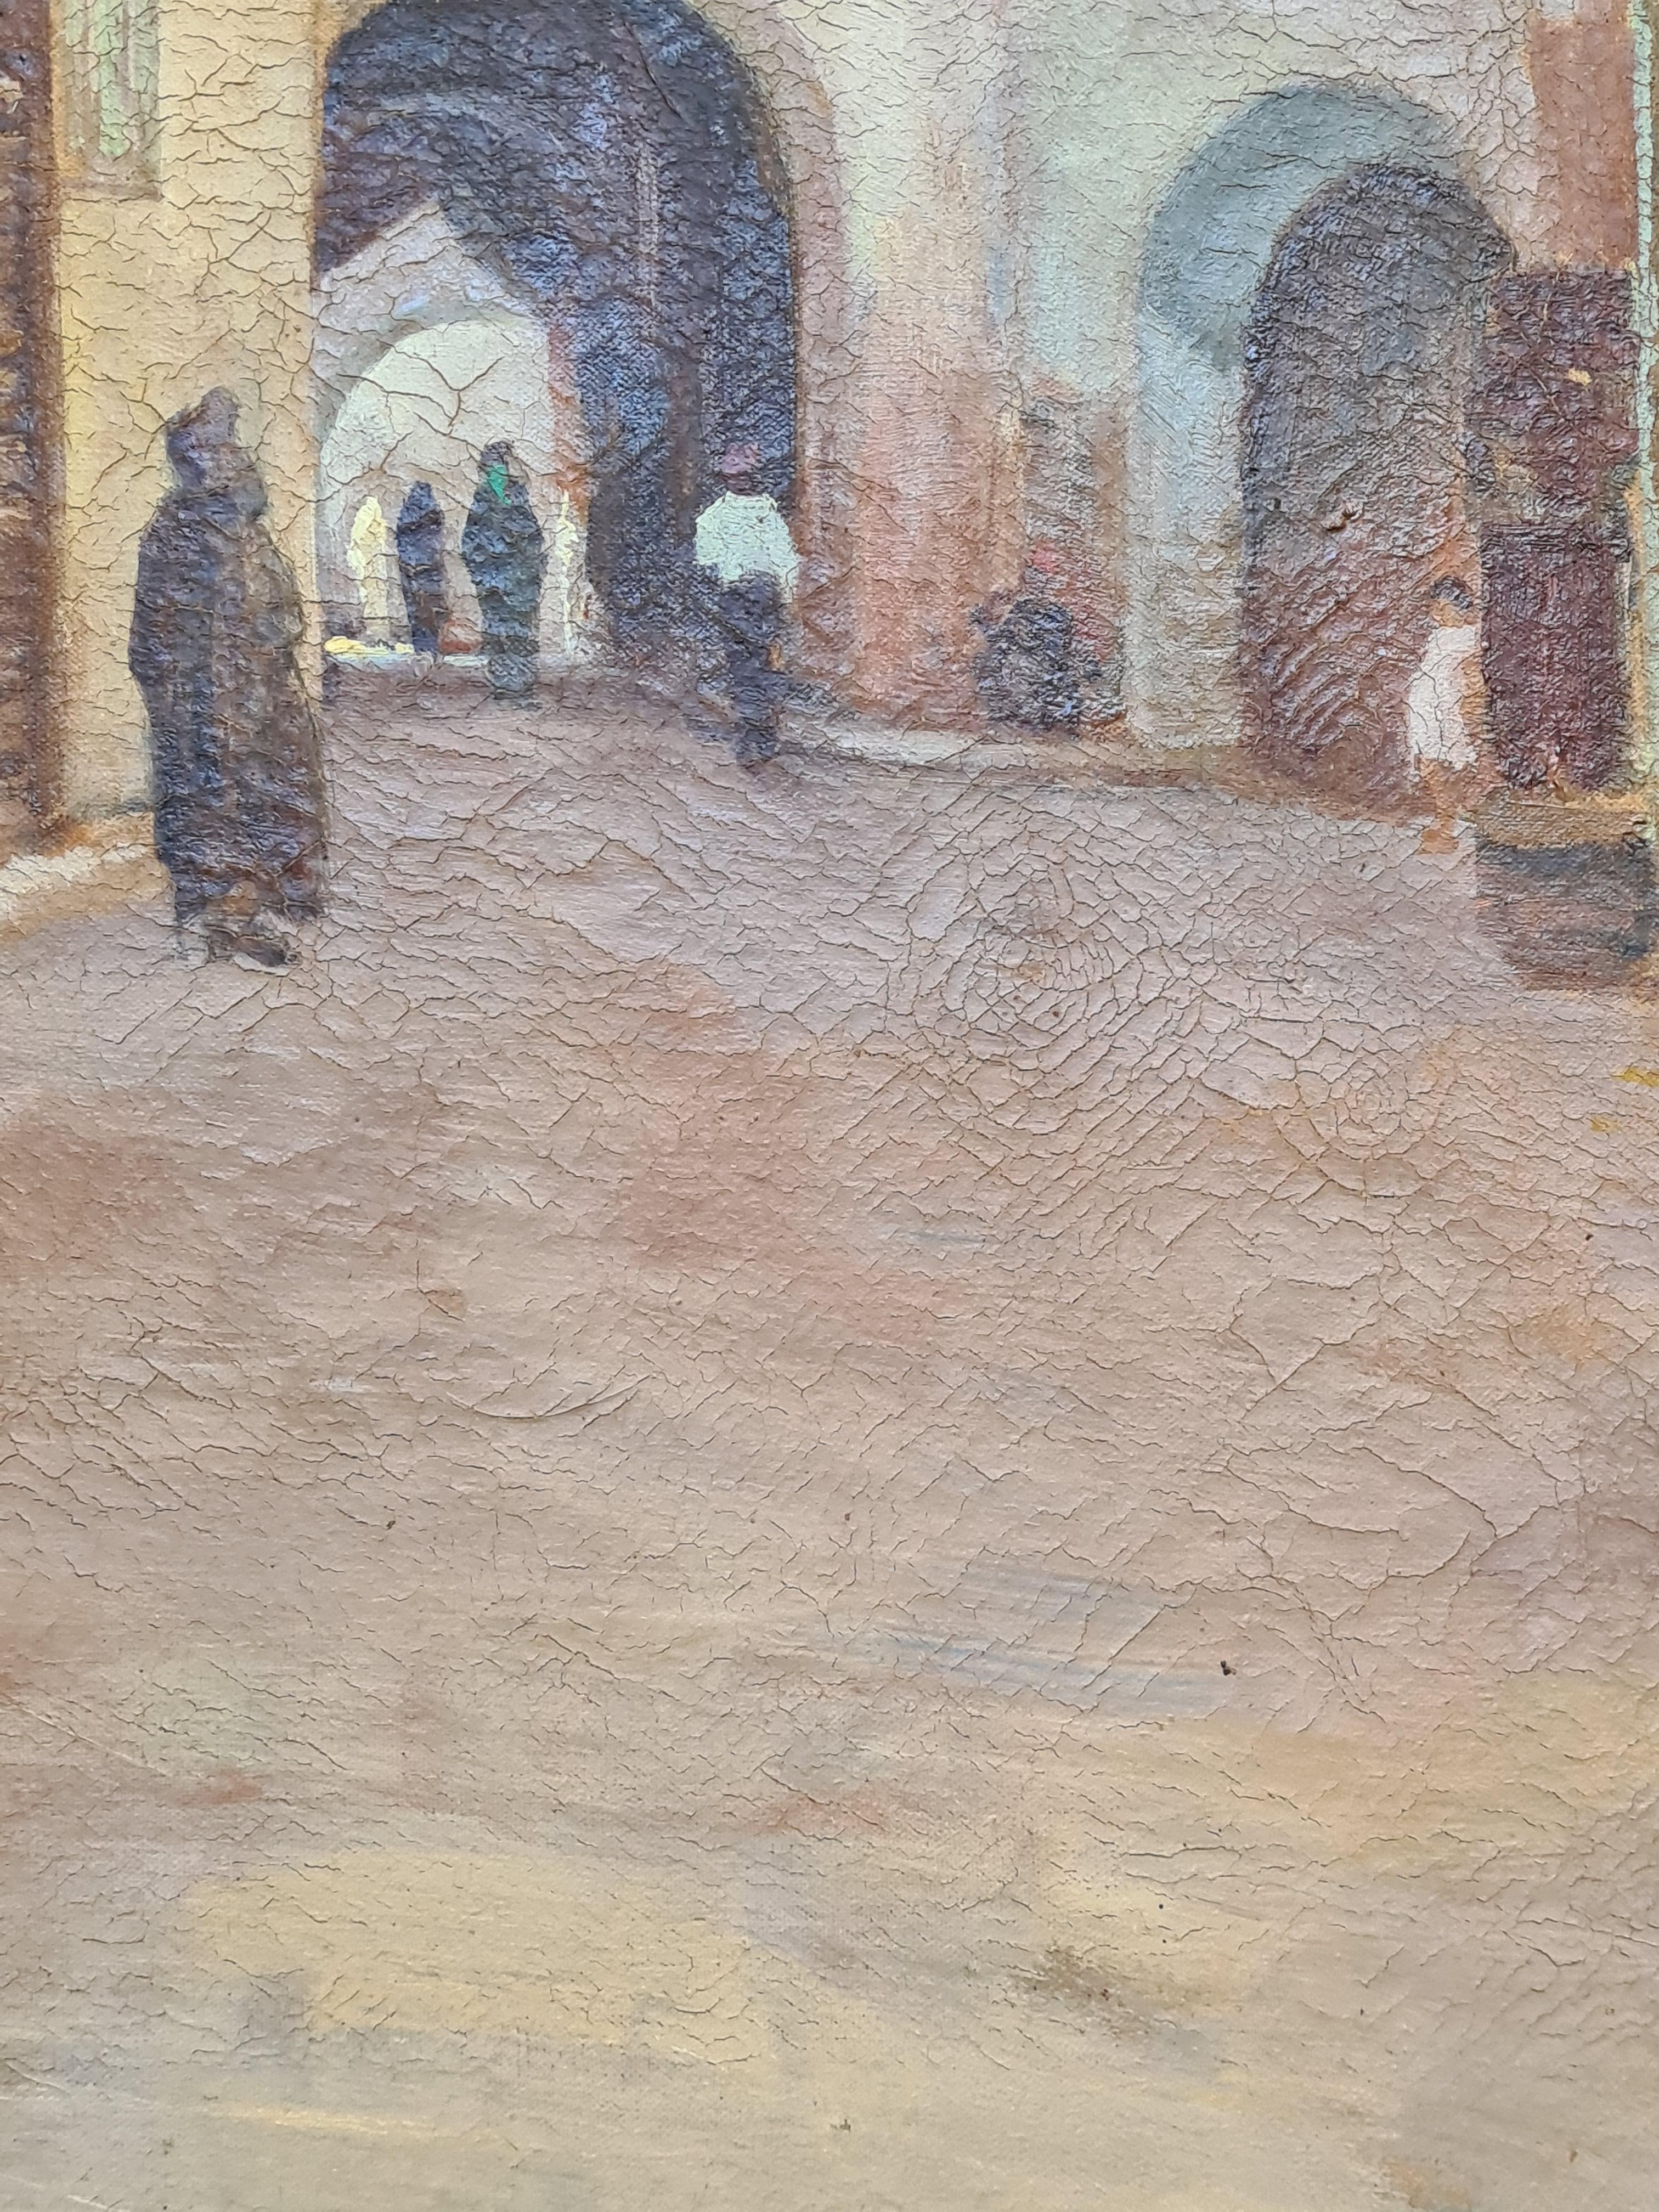 A late 19th century oil on canvas Orientalist street scene by L Bour. Signed and monogrammed bottom left.

A charming rendition of a street scene, the colourful buildings, carved wood doorways, a carpet seller sitting in front of his shop. Bour has